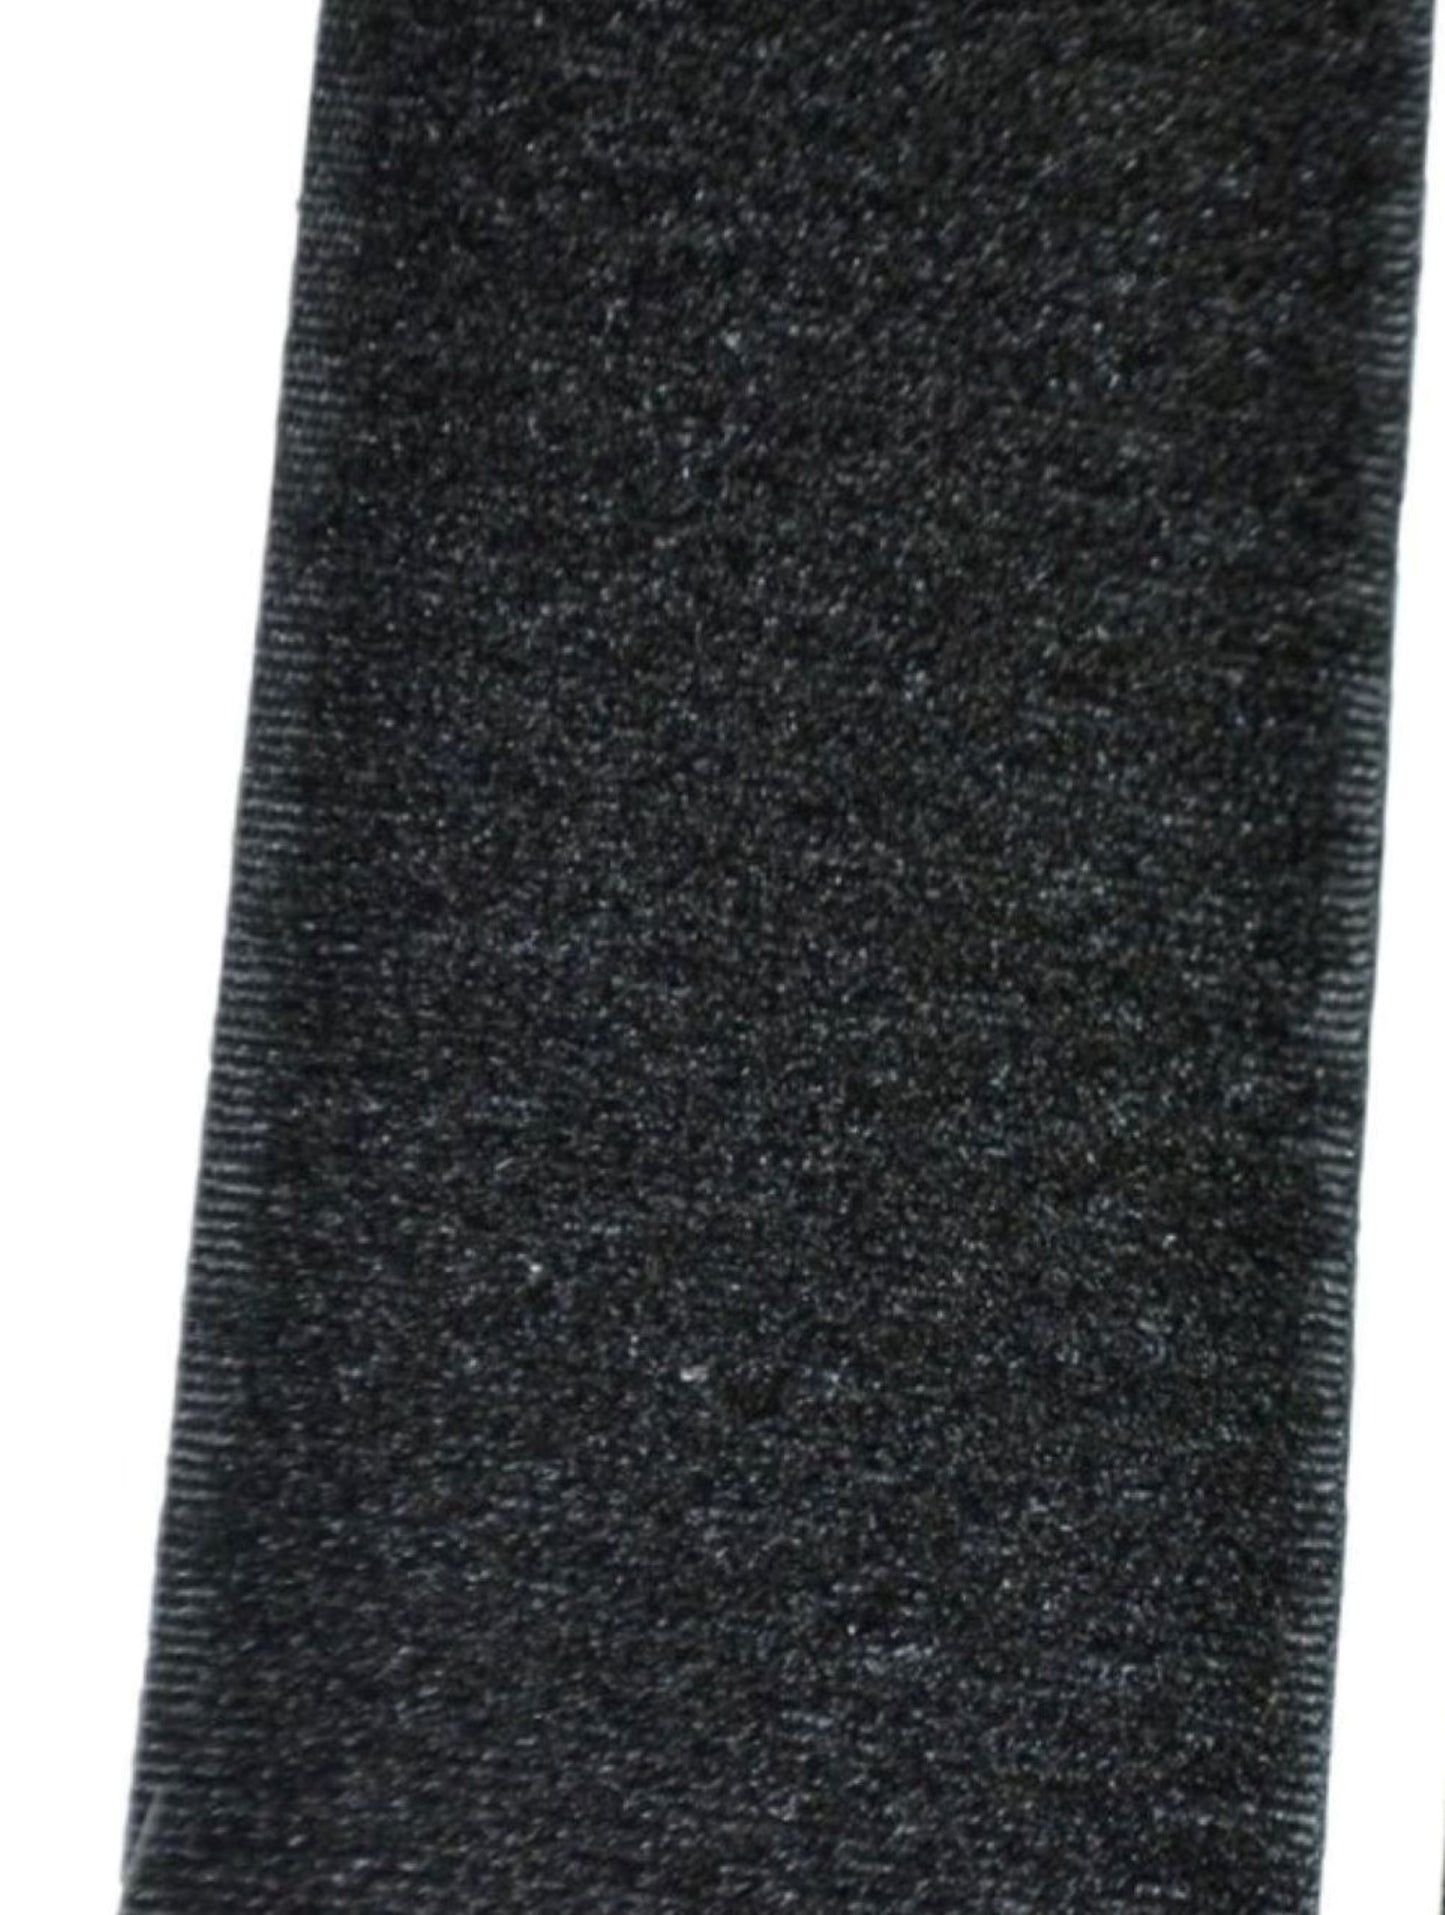 2 Inch Velcro Roll Sew-on Hook for upholstery projects on sale - Black